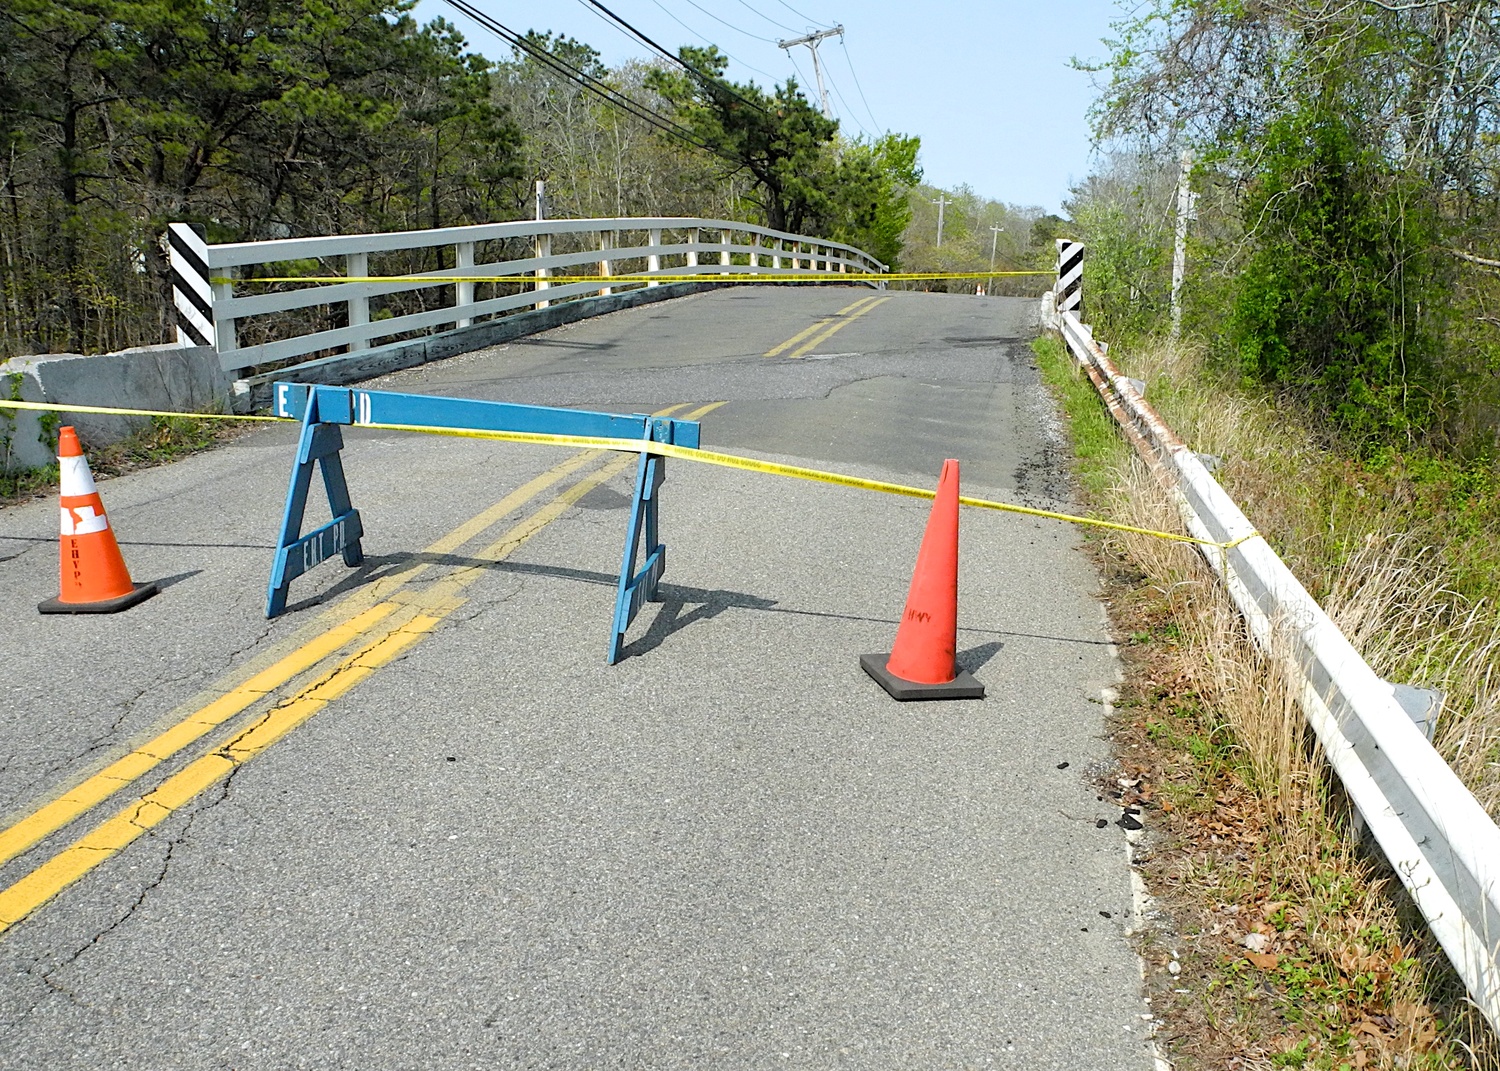 The Cranberry Hole Road bridge, which spans the Long Island Rail Road tracks, was blocked off this week because a hole has formed in the bridge decking, which was identified as dangerous by a state study more than six years ago.